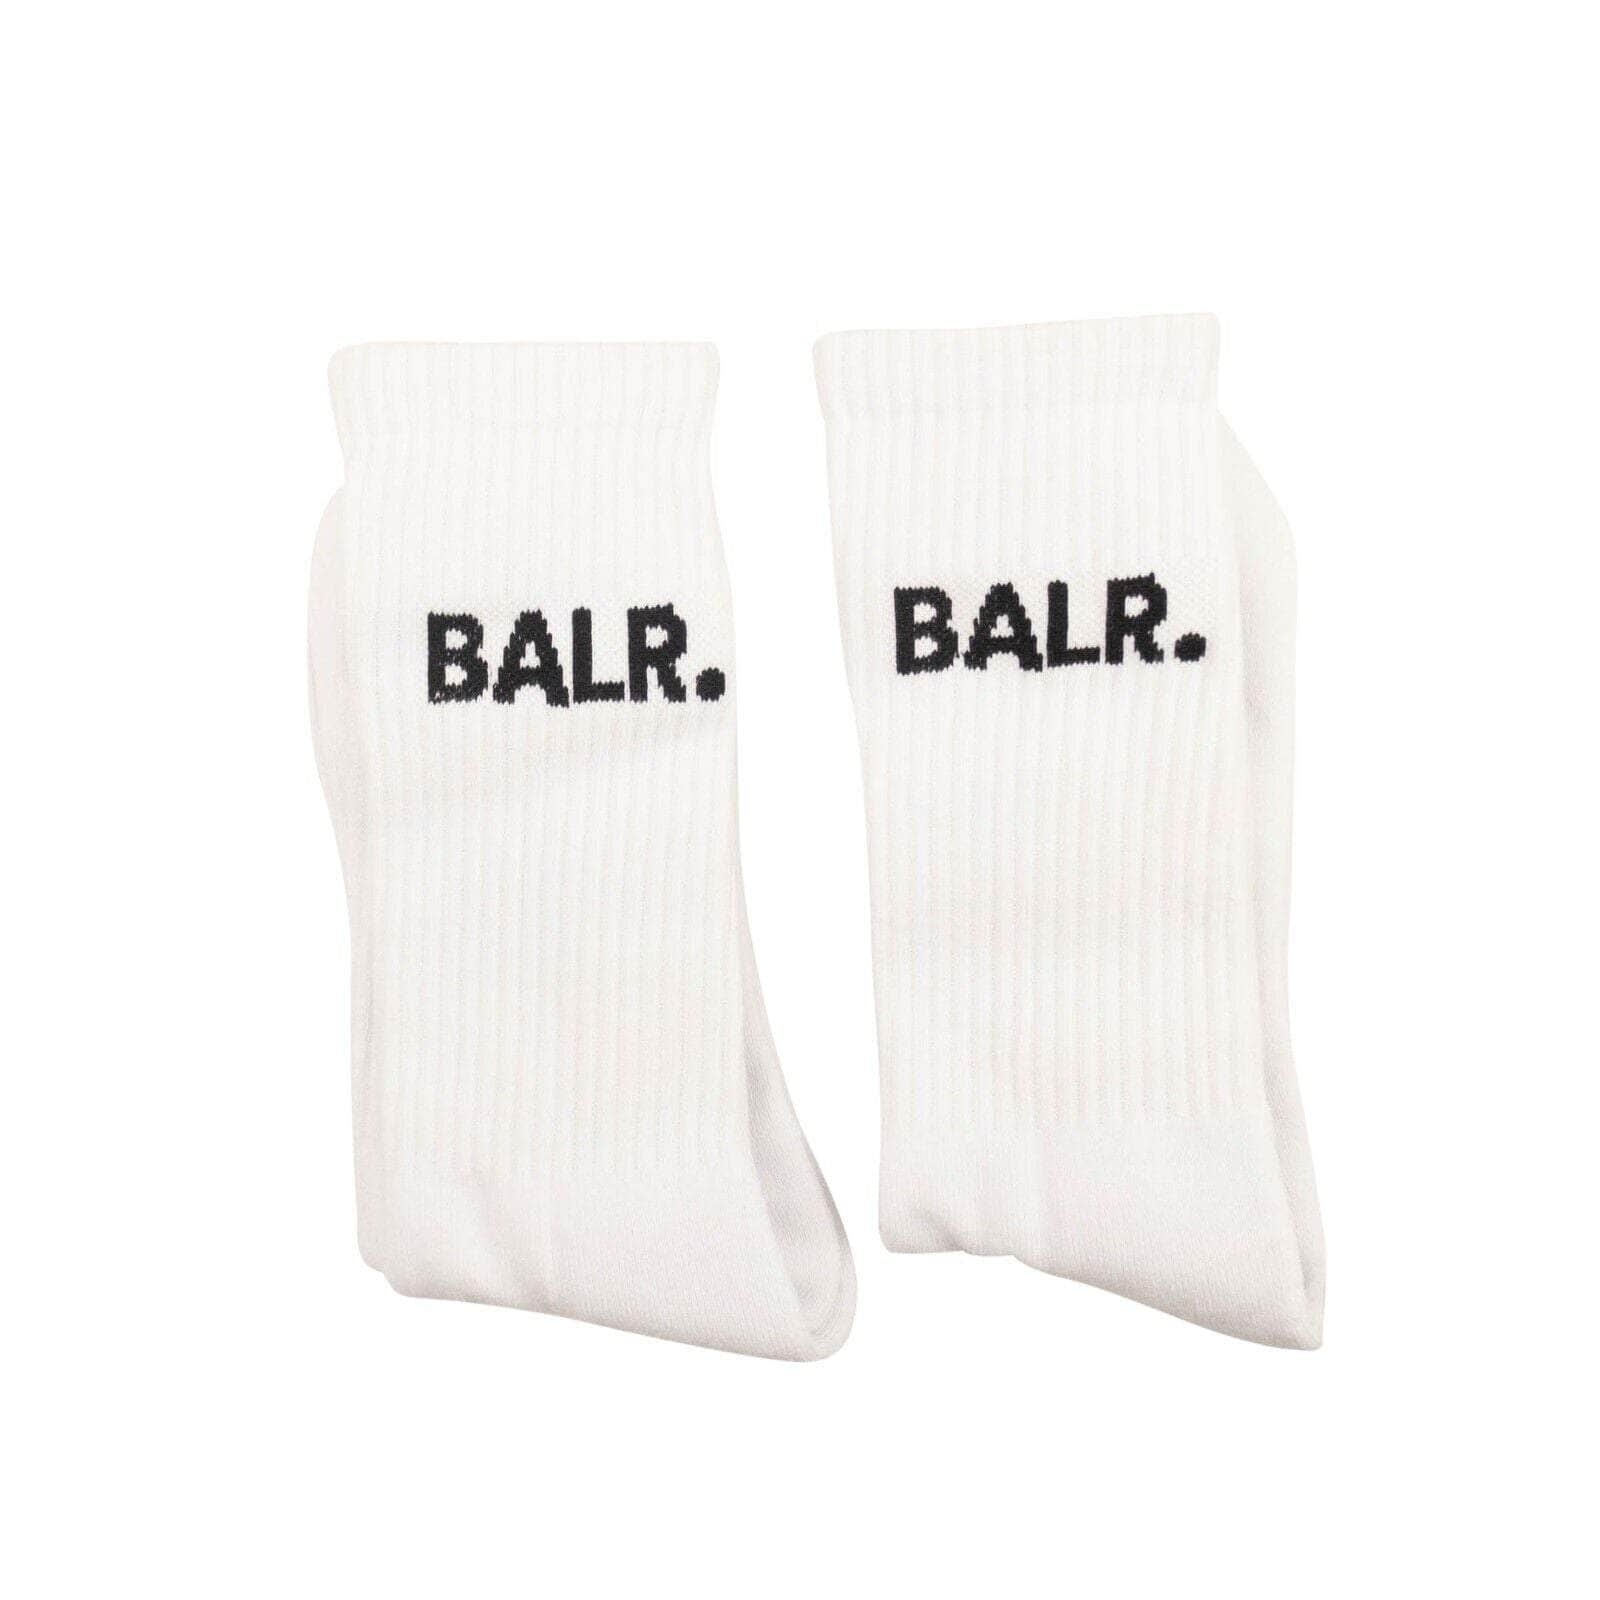 BALR. channelenable-all, chicmi, couponcollection, gender-womens, main-accessories, shop375 White 2 Pack Ribbed Logo Socks